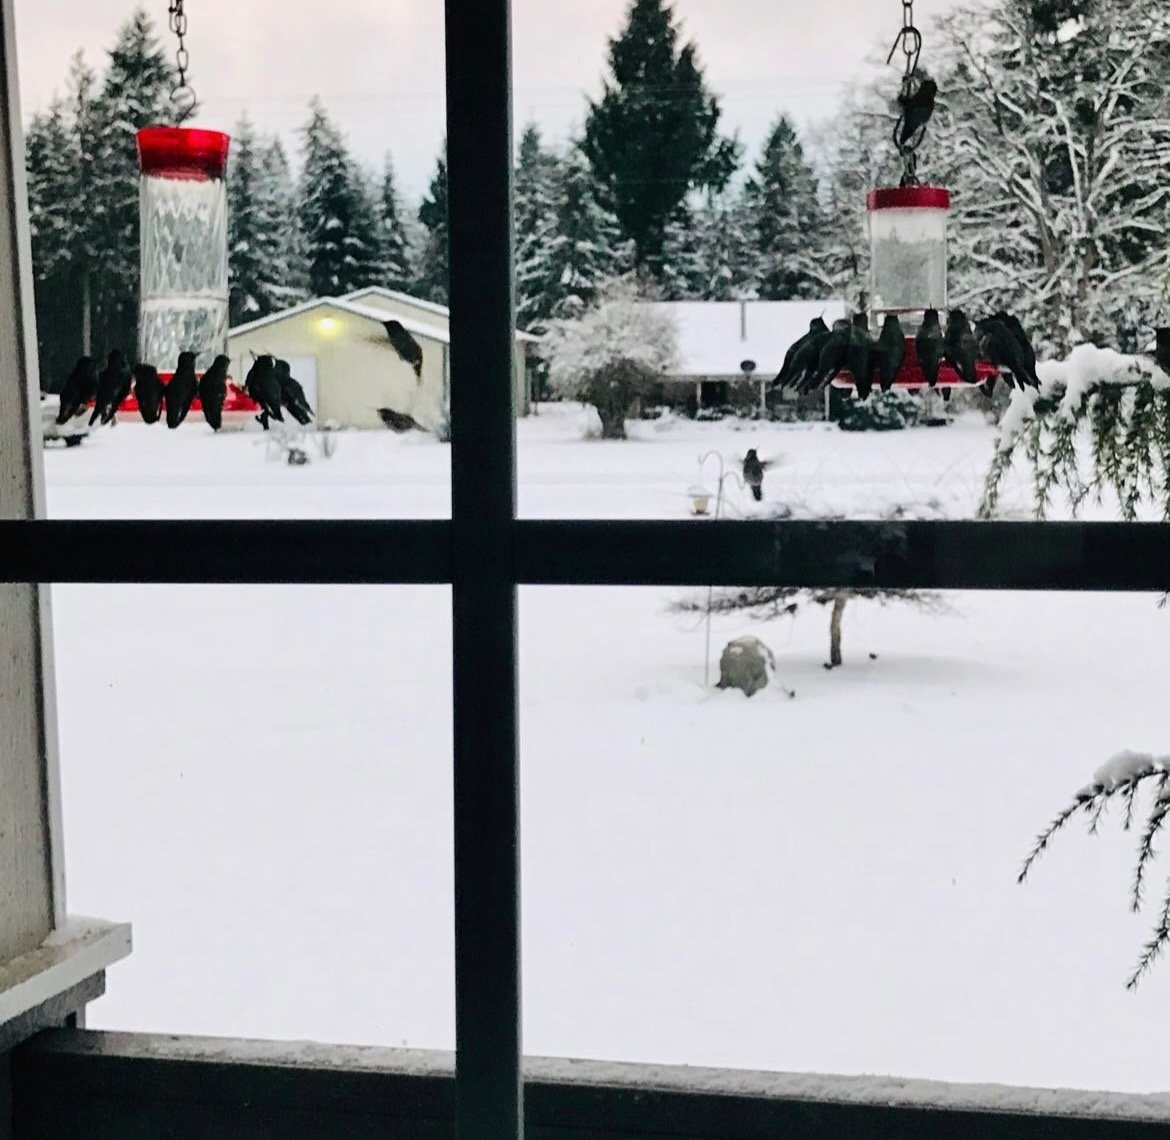 Things were getting a bit crowded at these hummingbird feeders in Chehalis. Blake T., of Chehalis, took this photo of hummingbirds in the snow late afternoon Monday.